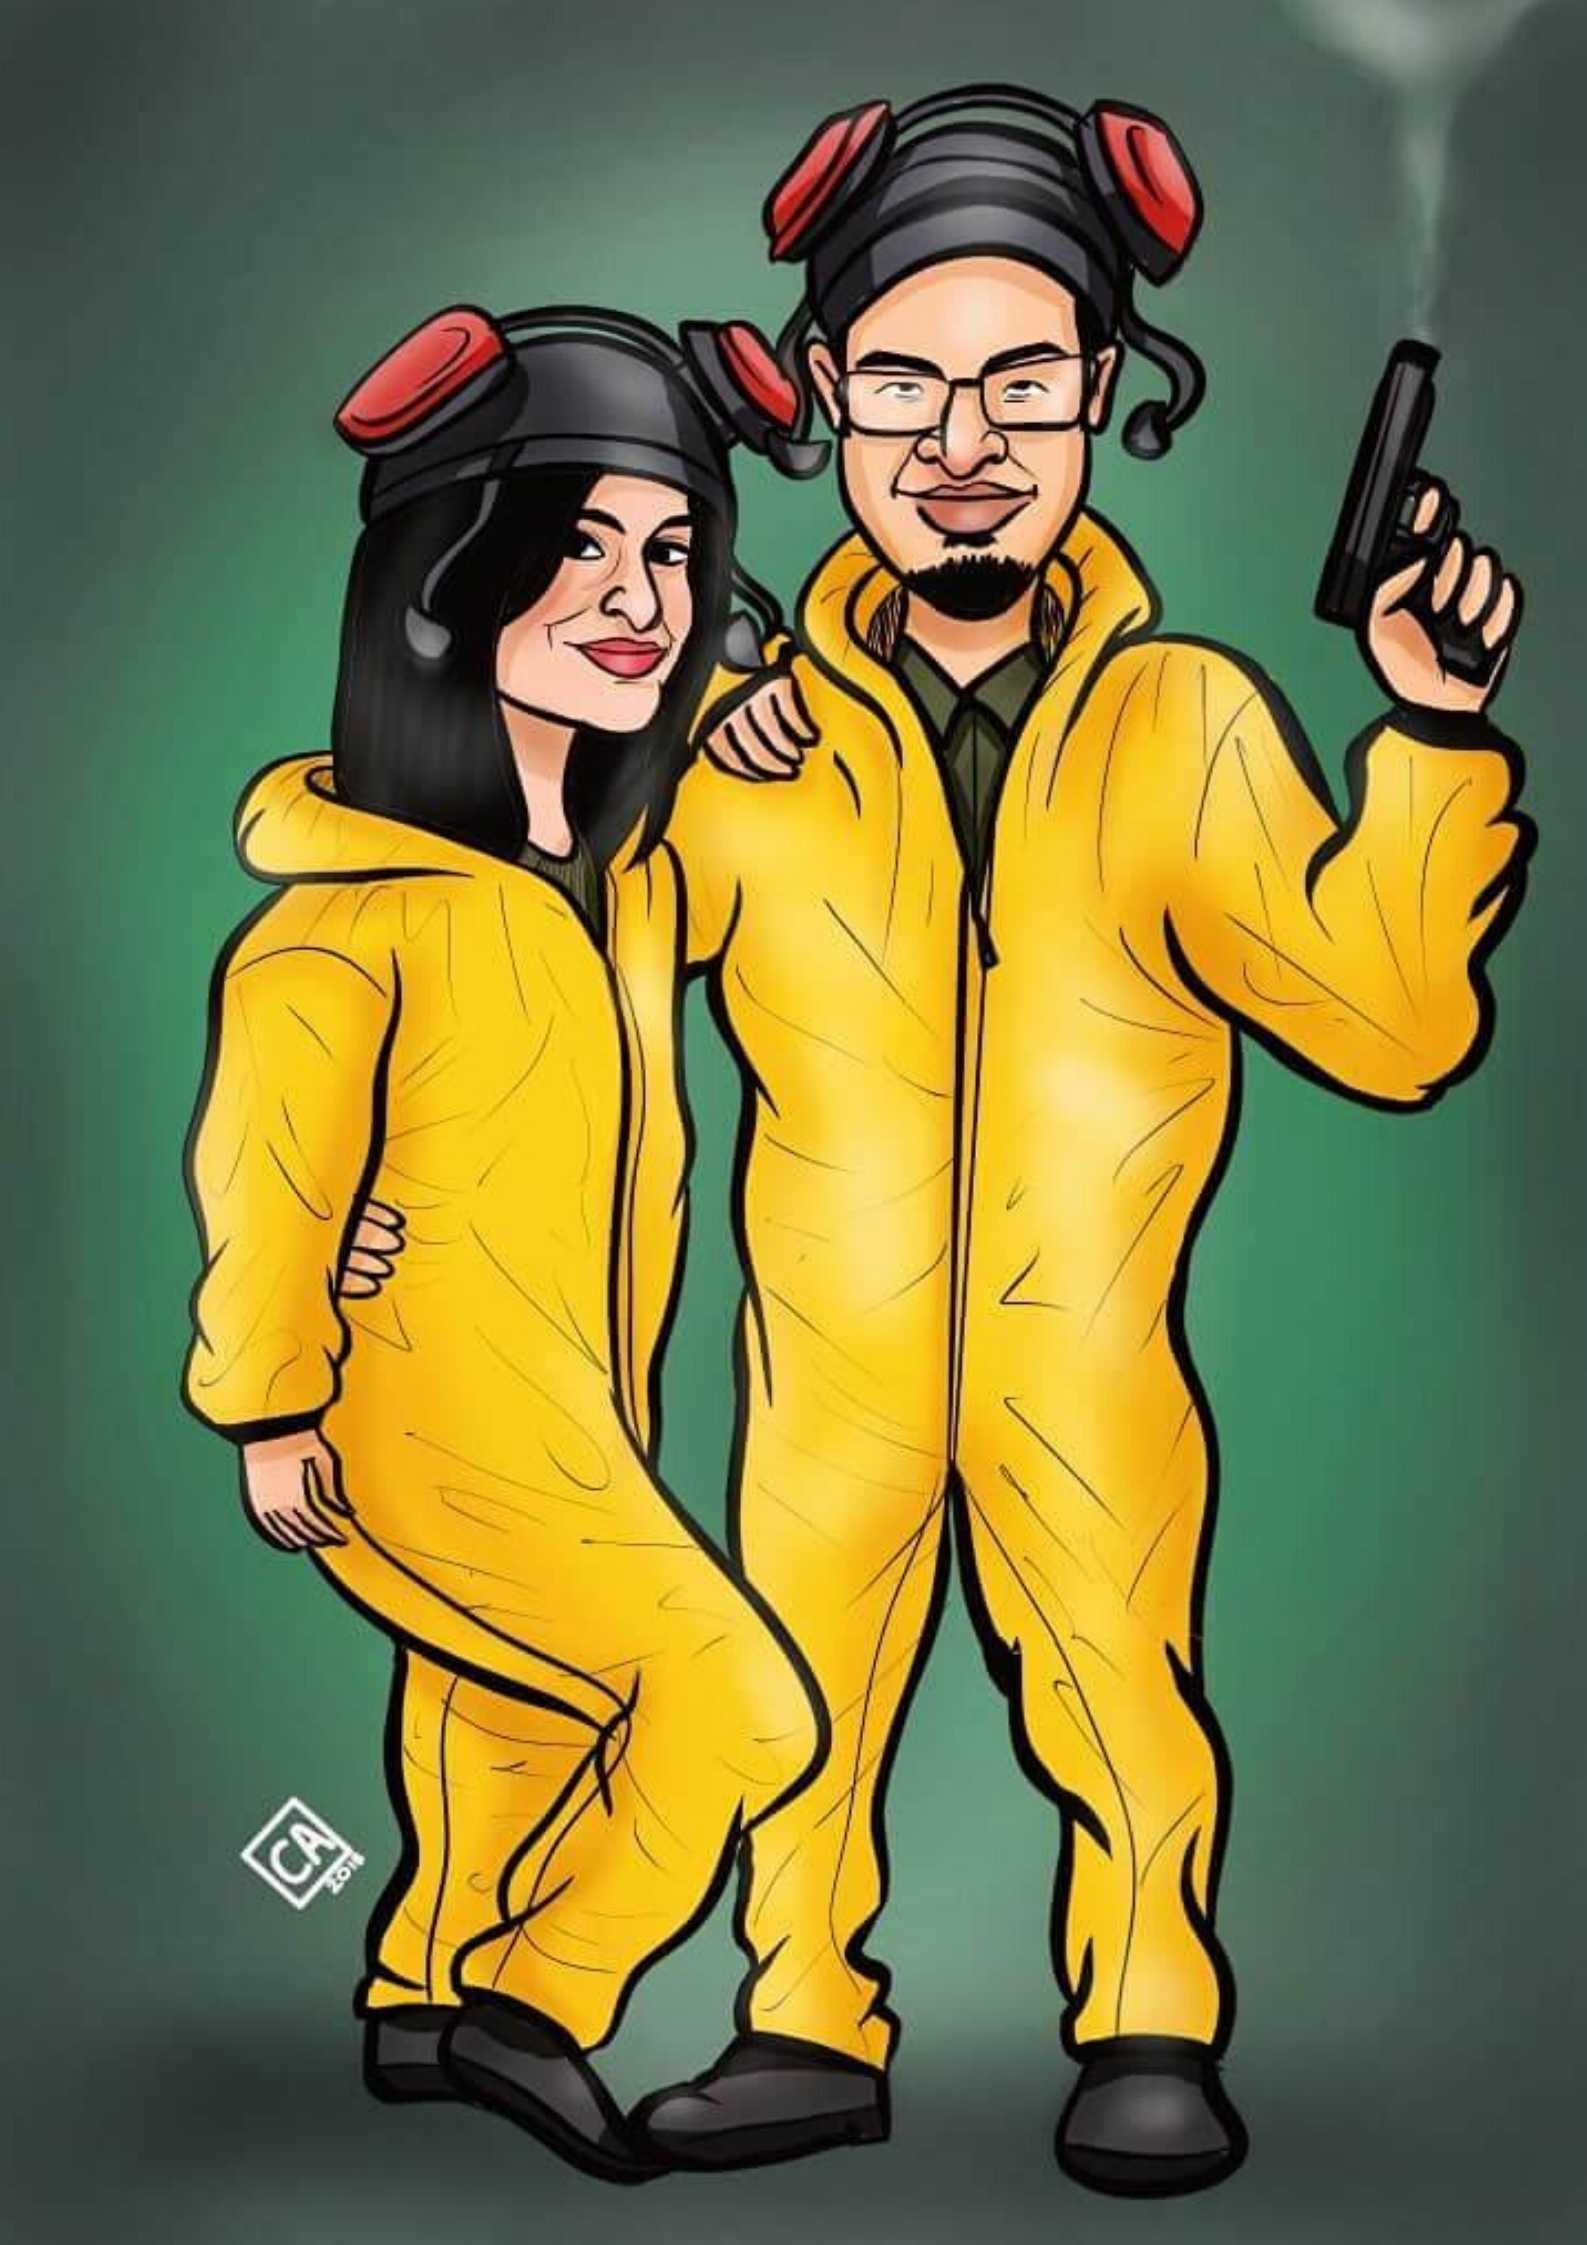 Breaking bad themed caricature - couple gifts